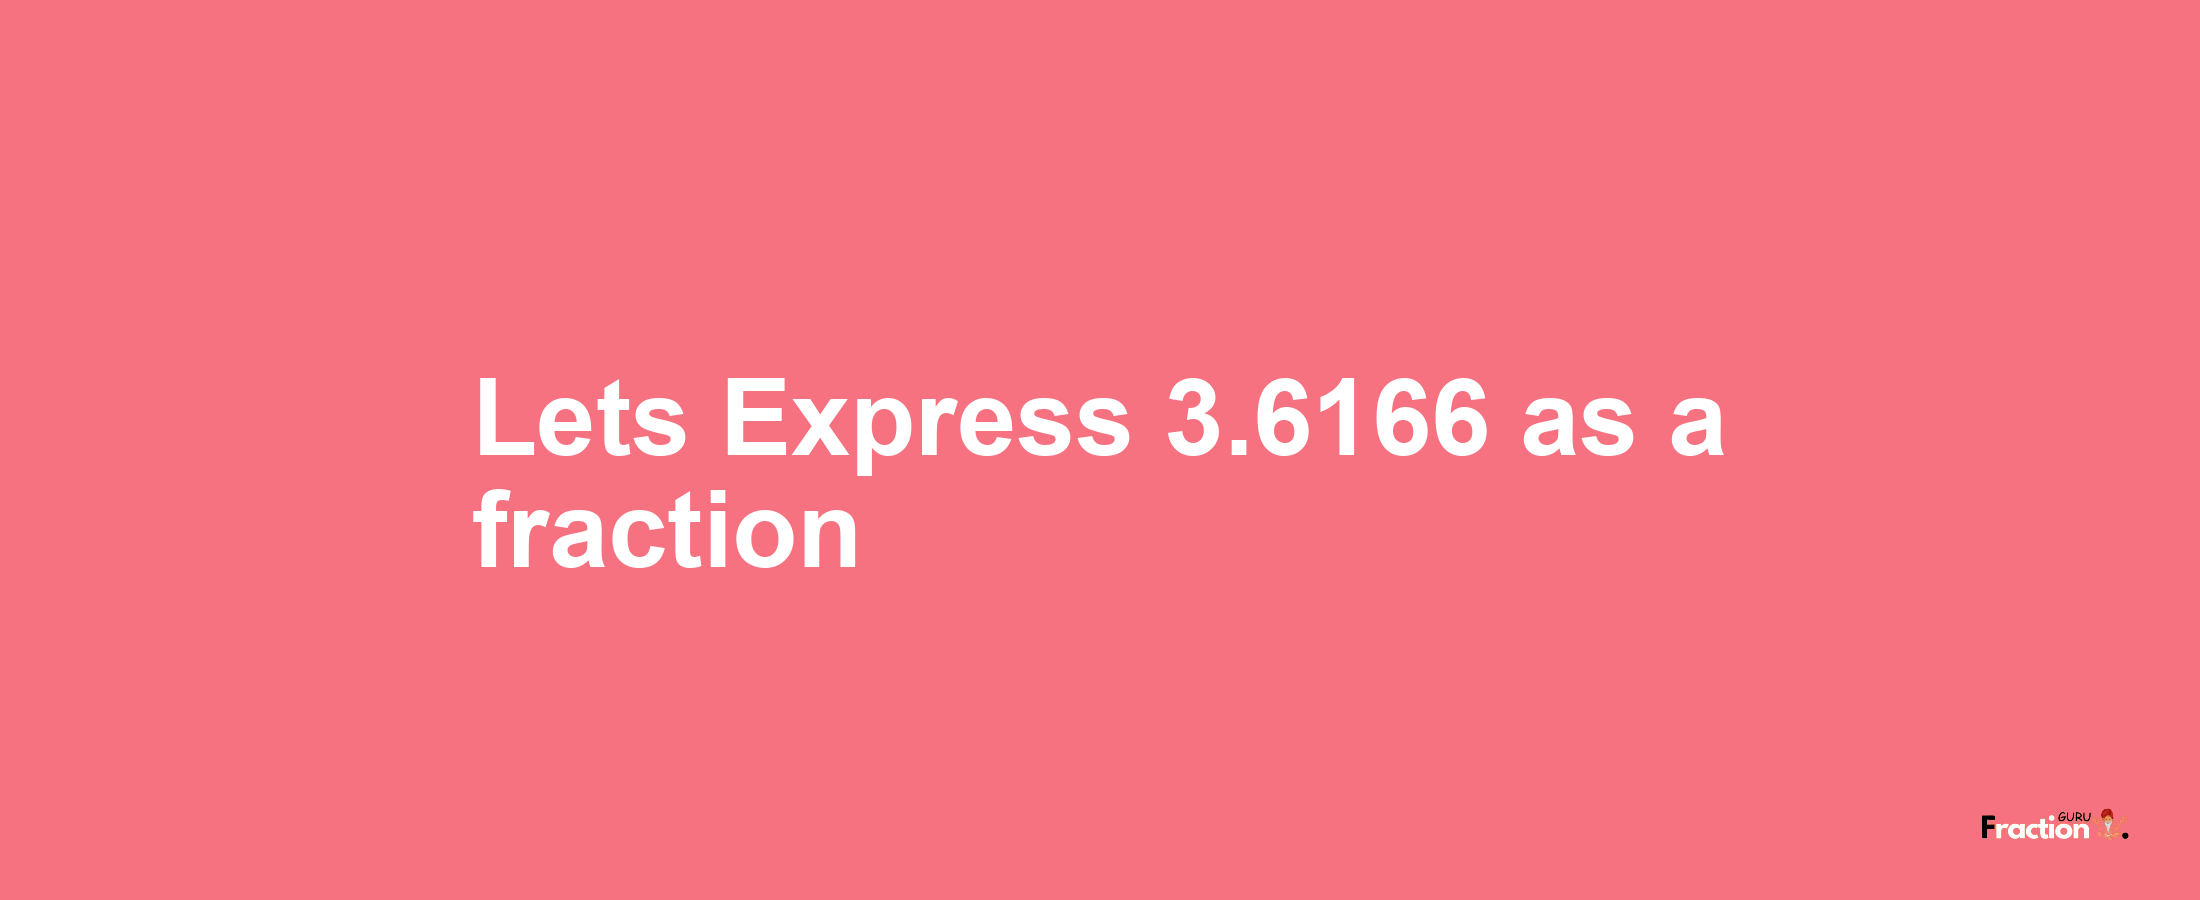 Lets Express 3.6166 as afraction